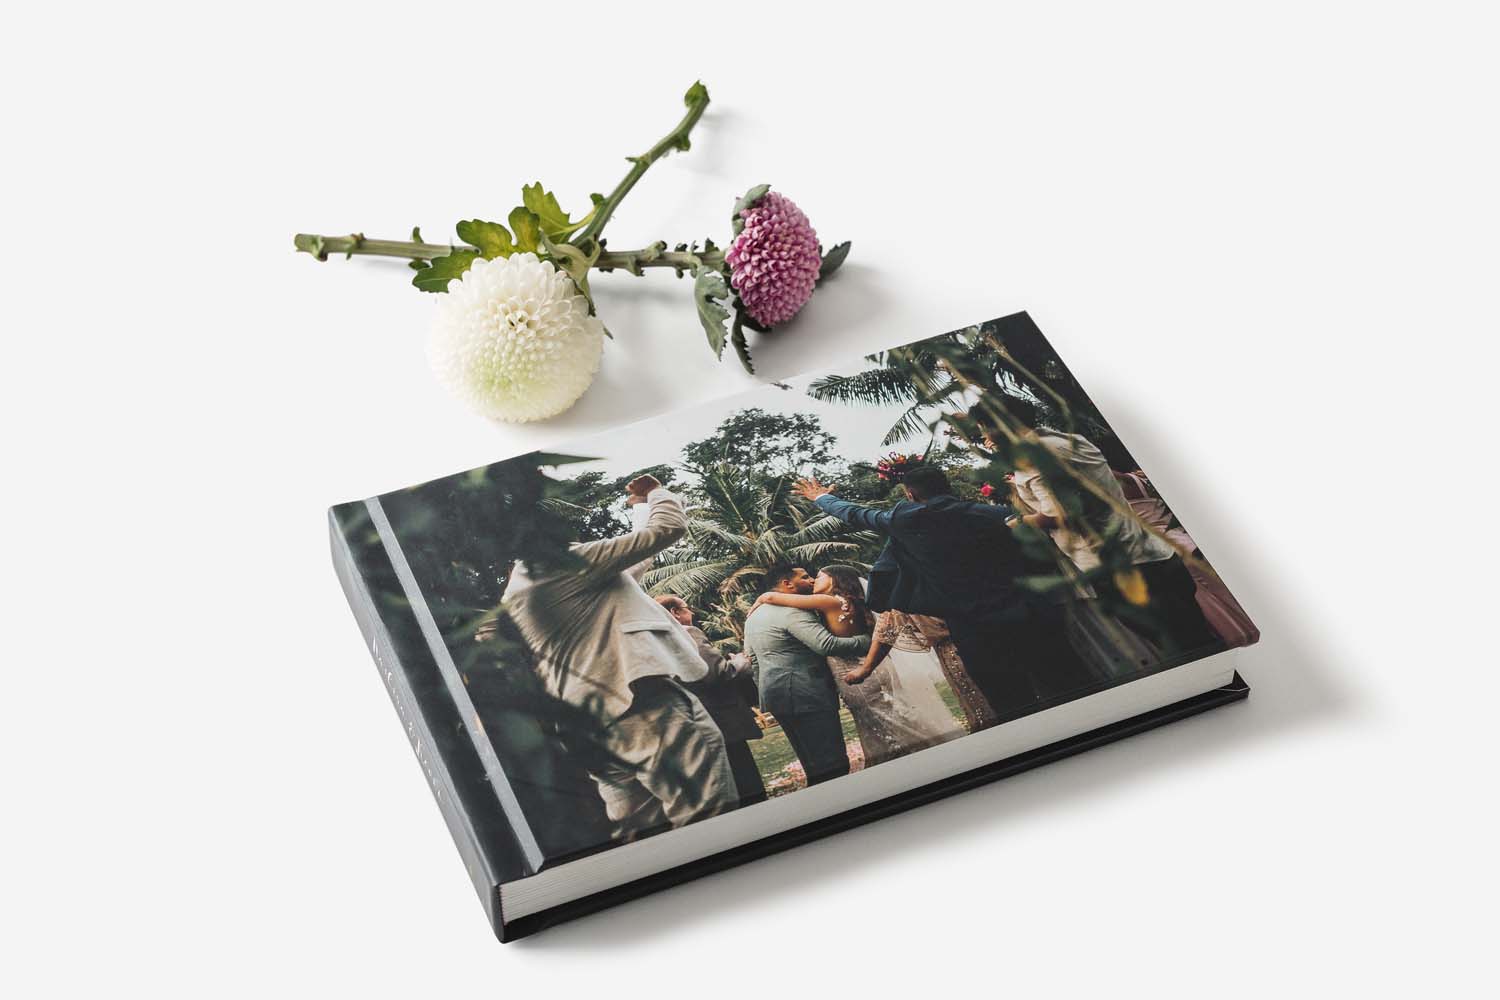 a white background with several flowers and an Albums Remembered wedding album with an image of a bride and groom kissing in a tropical location on the cover